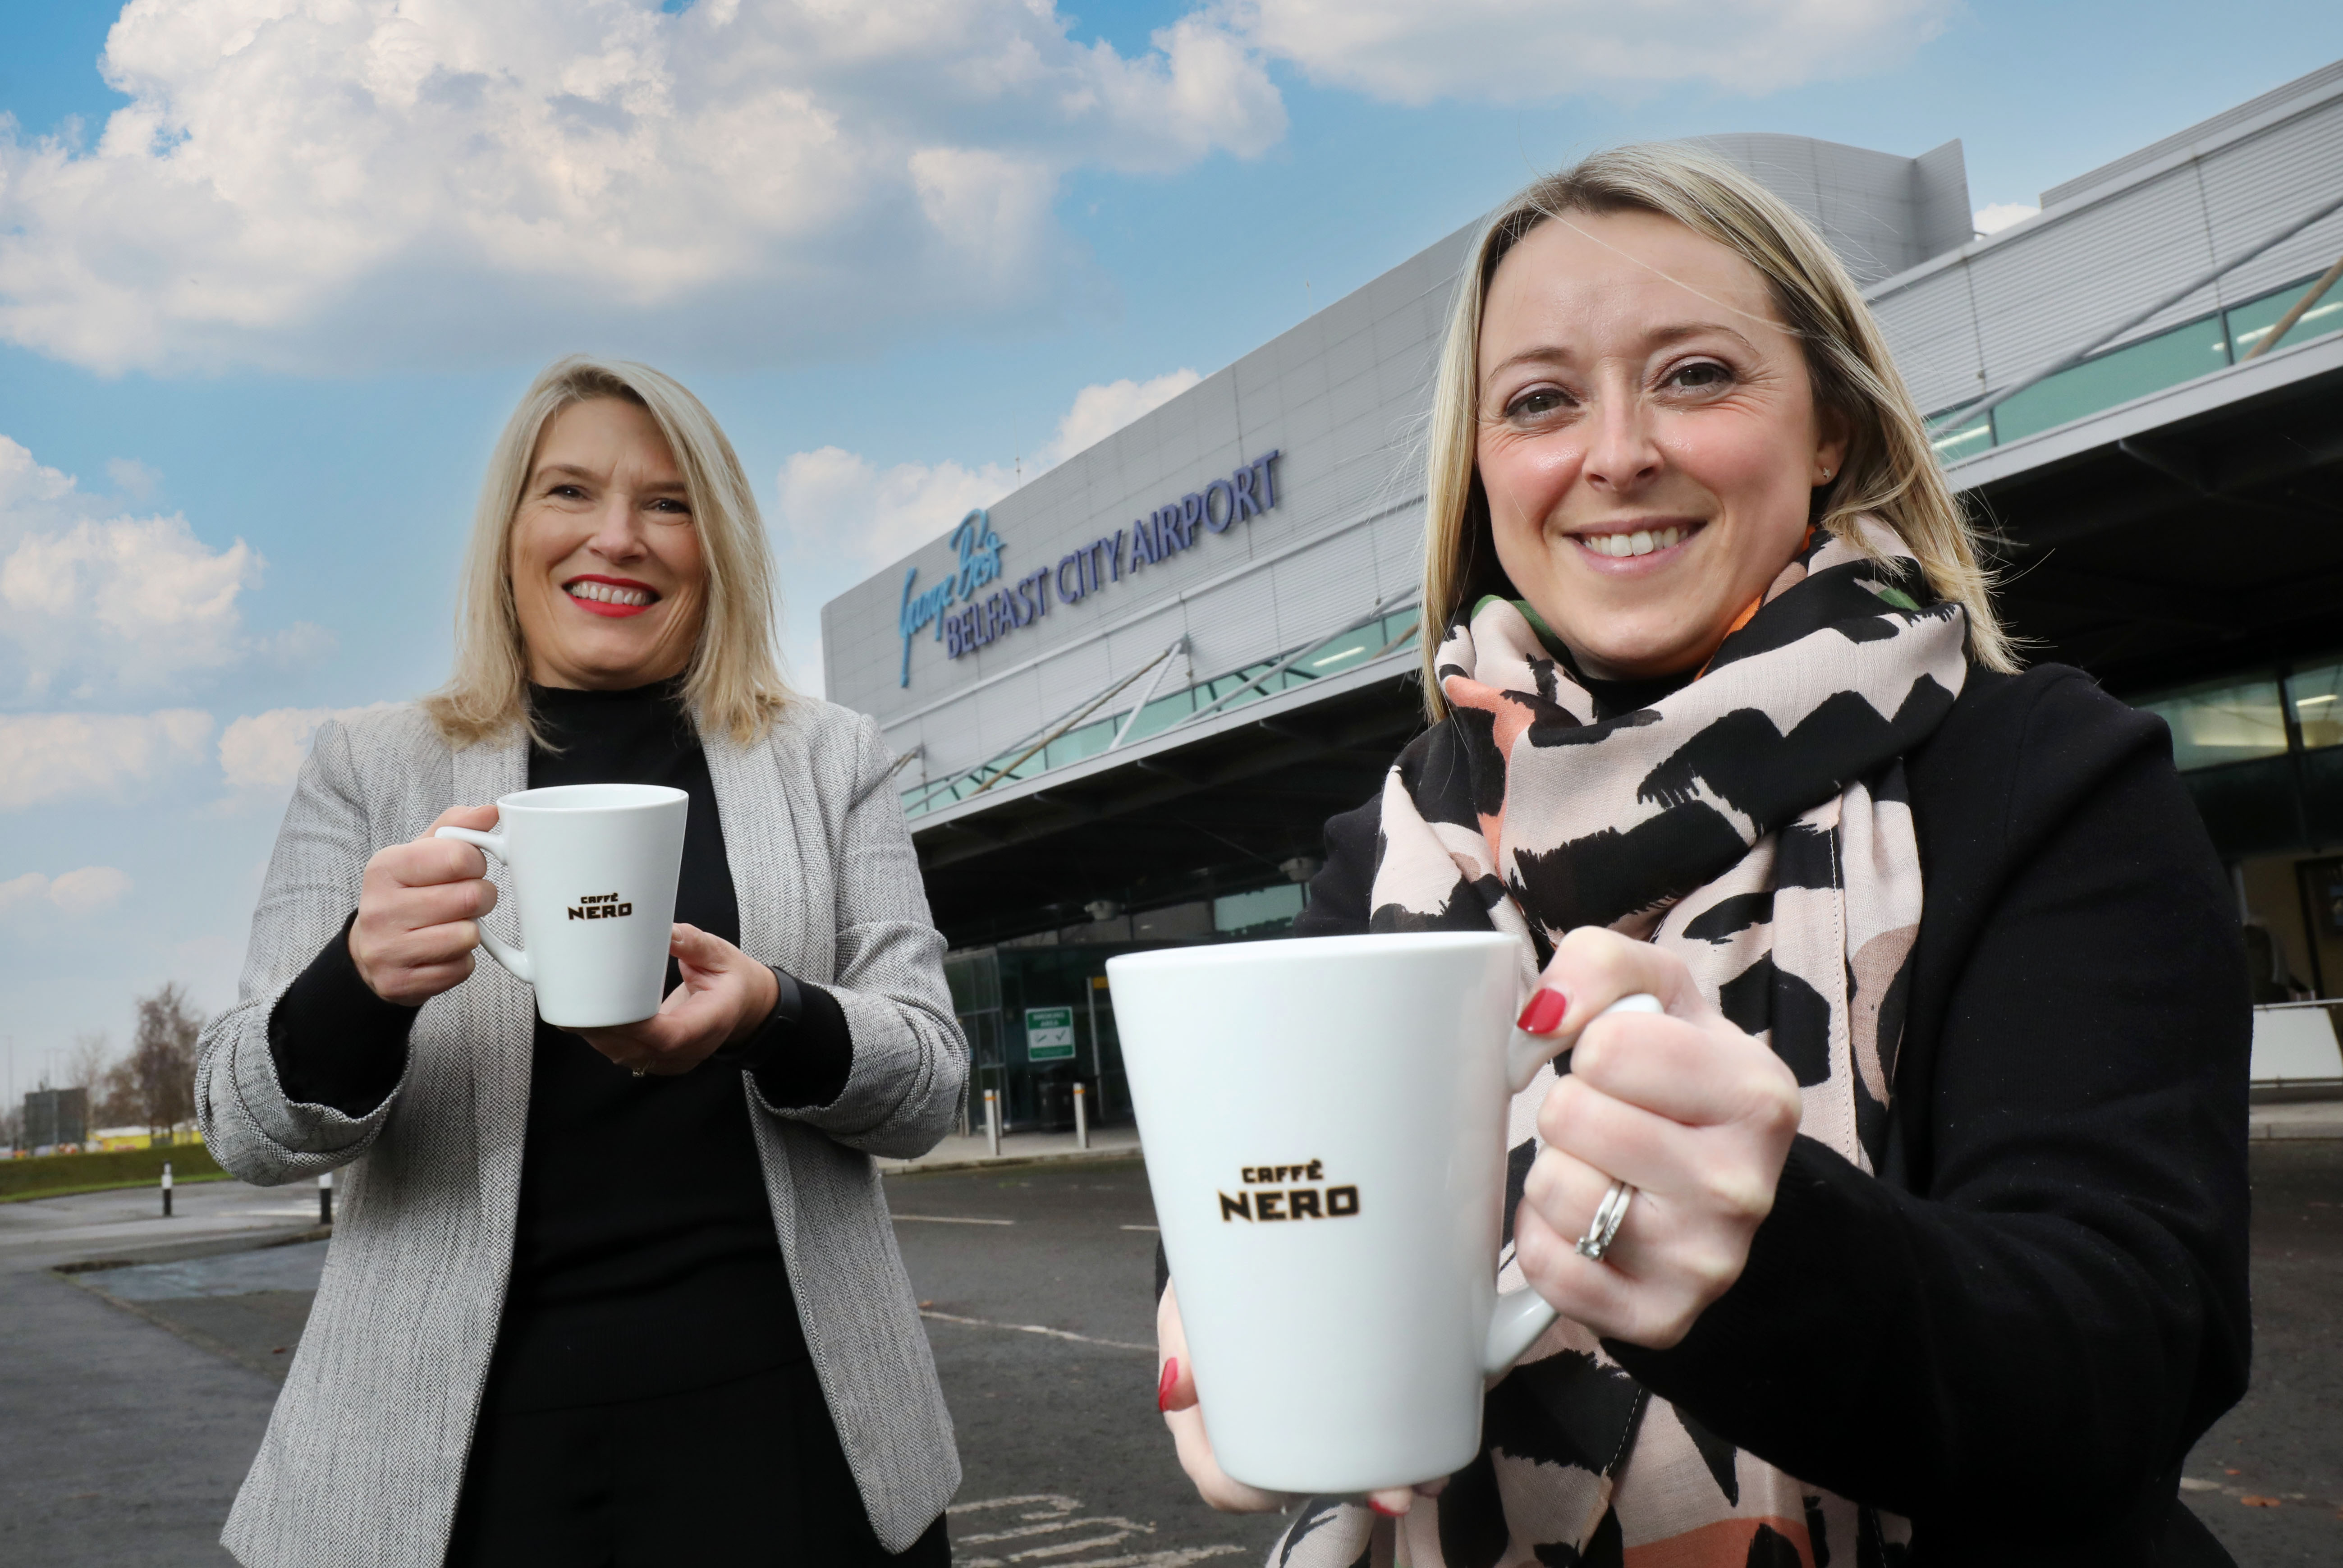 Beans mean business as Caffe Nero opens its doors at Belfast City Airport